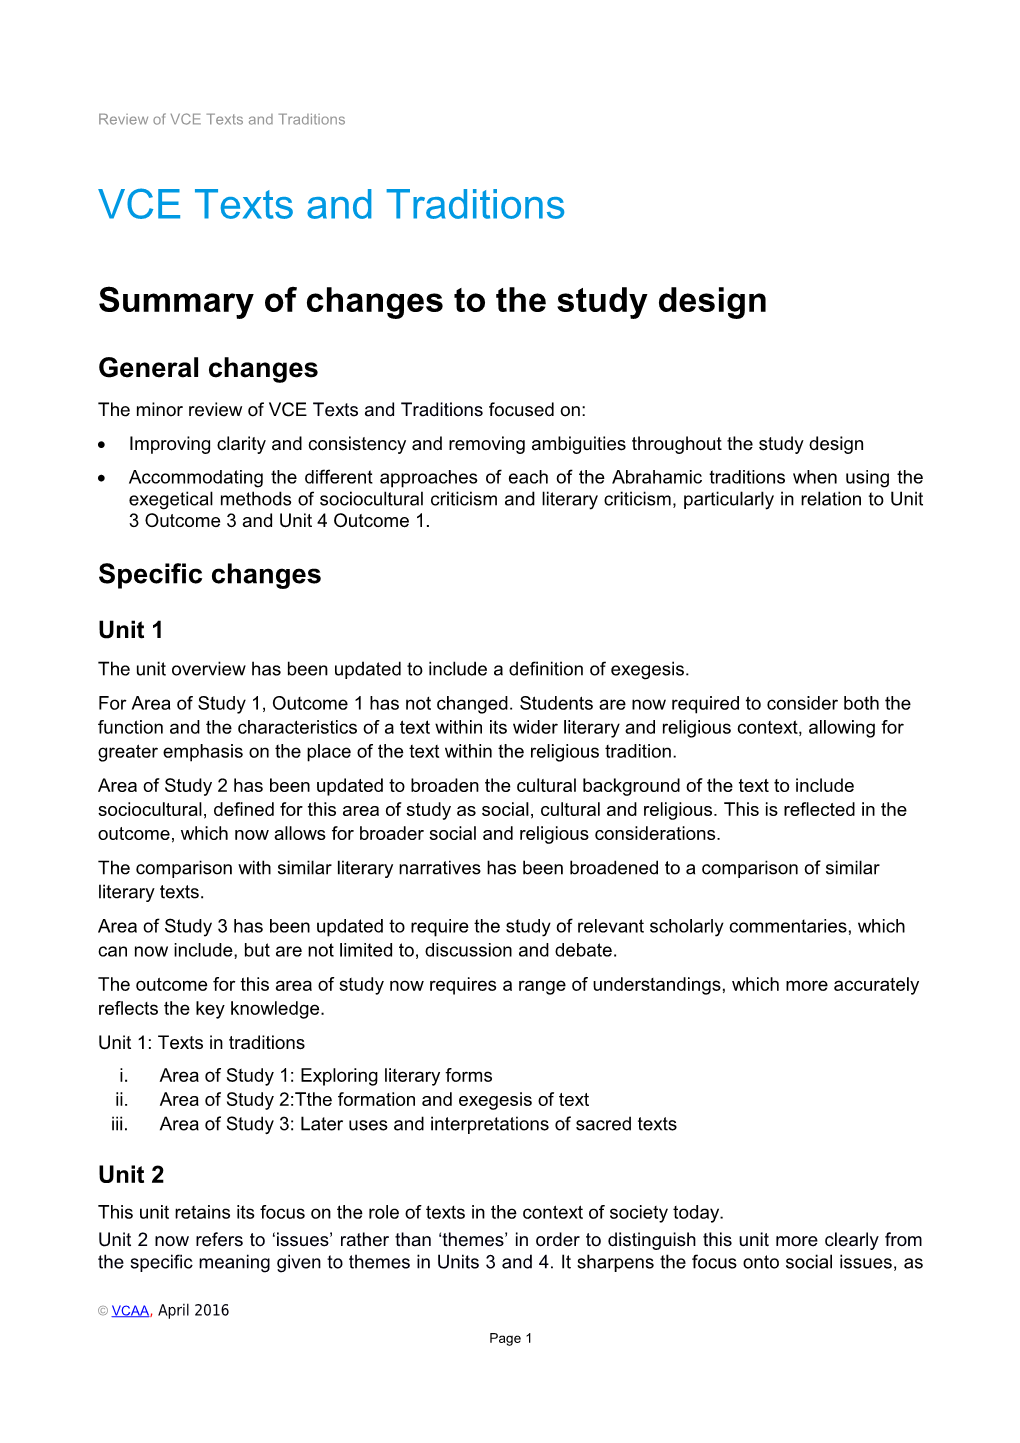 VCE Texts and Traditions - Summary of Changes